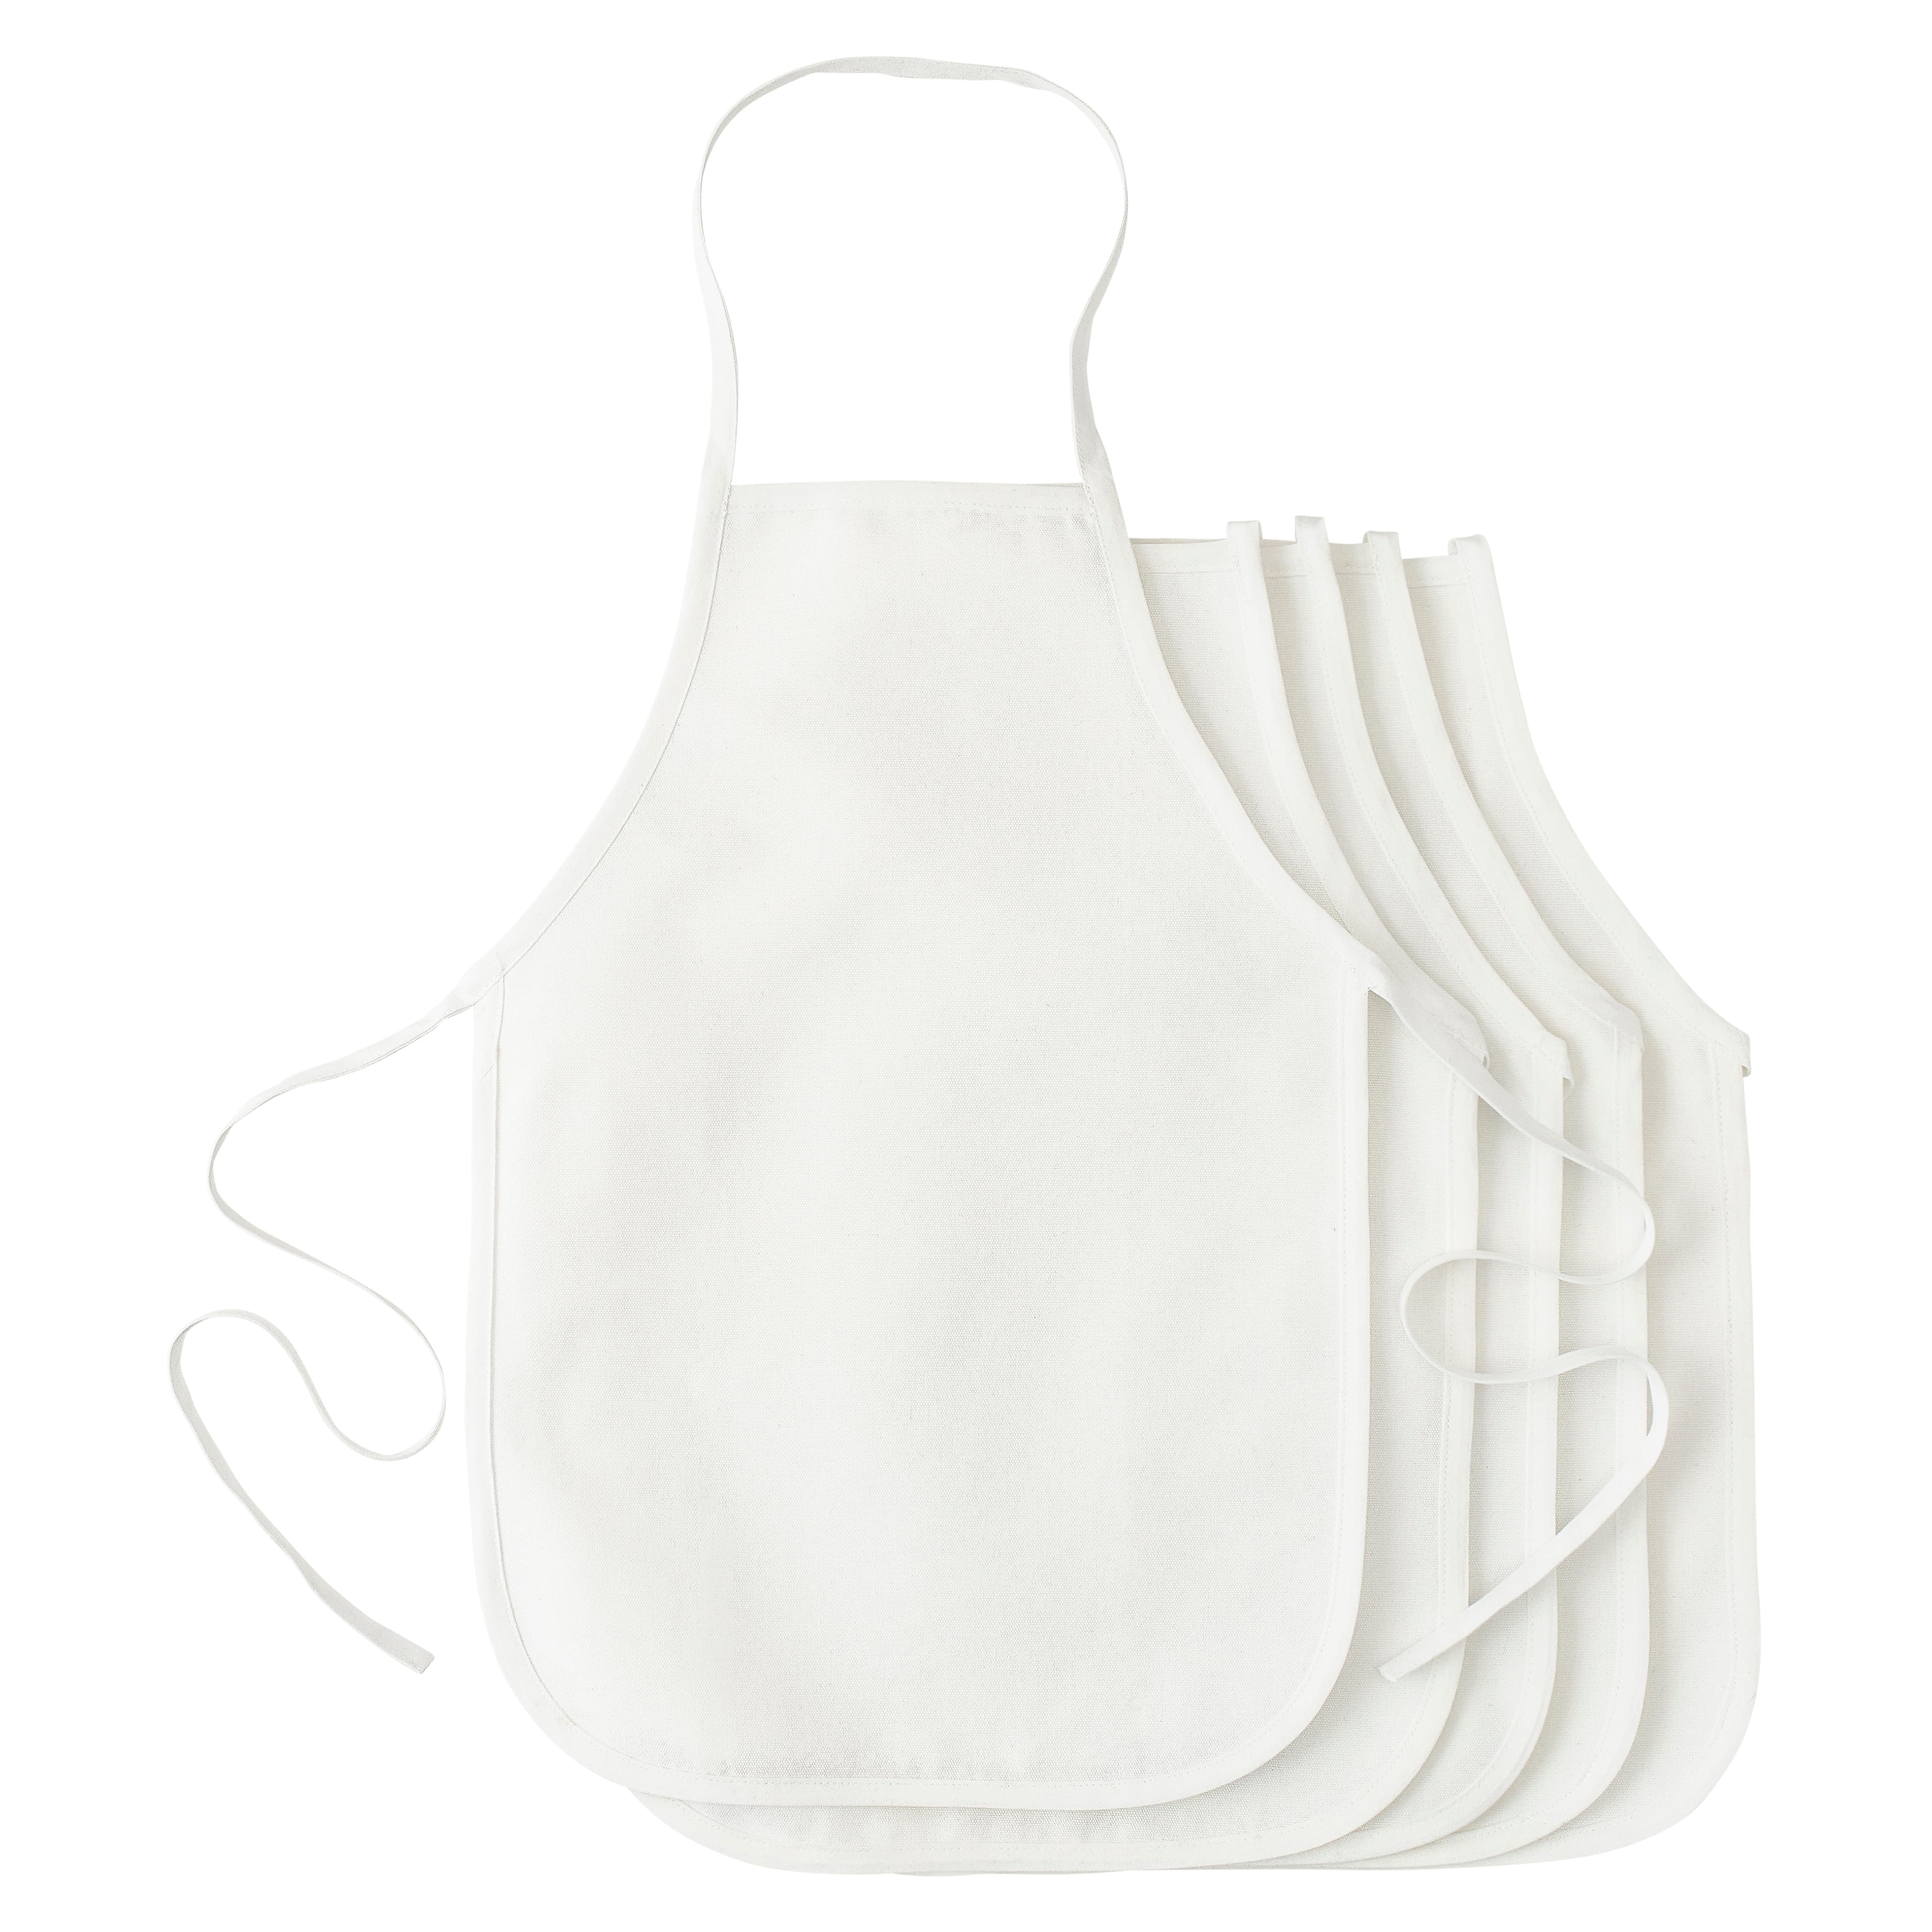 Kid's Size Cooking and Baking Kid Artist Apron Set - China Apron